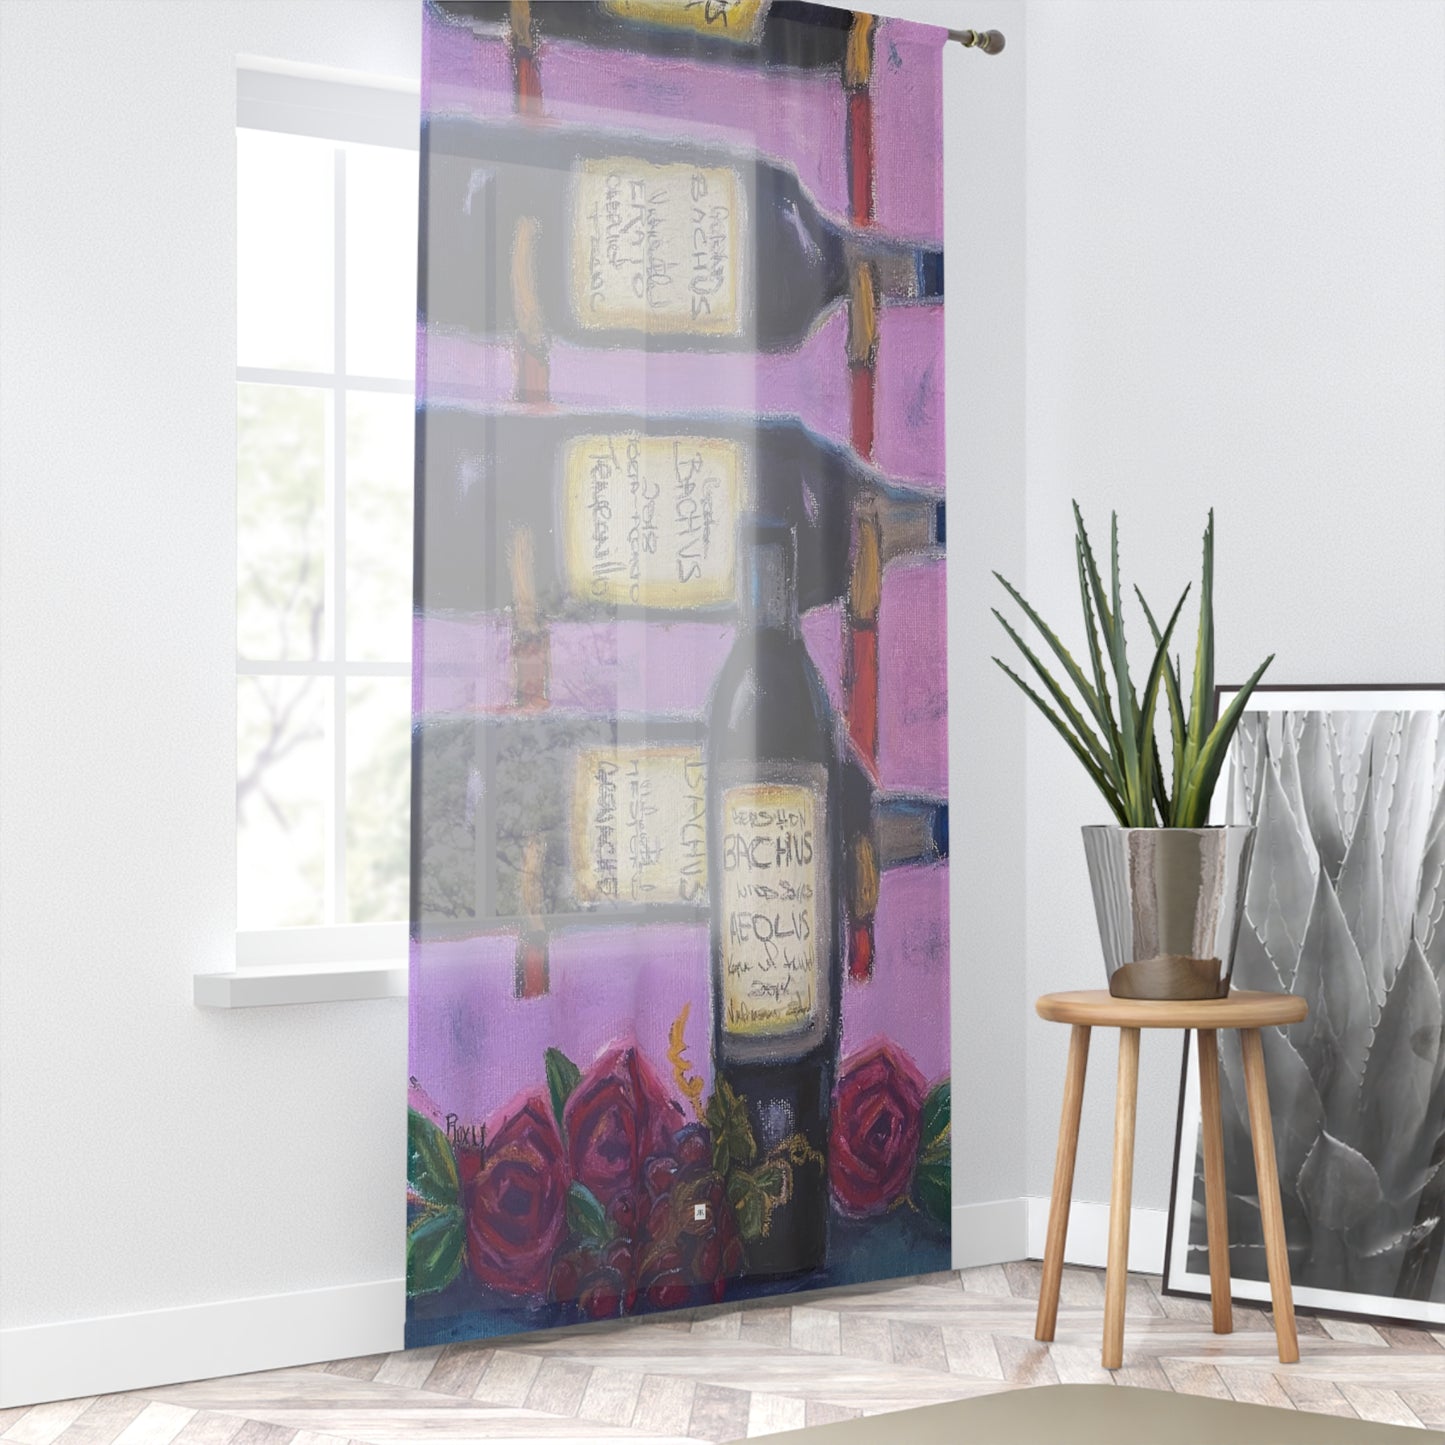 Bachus Reserves GBV Wine Rack & Roses on 84 x 50 inch Sheer Window Curtain